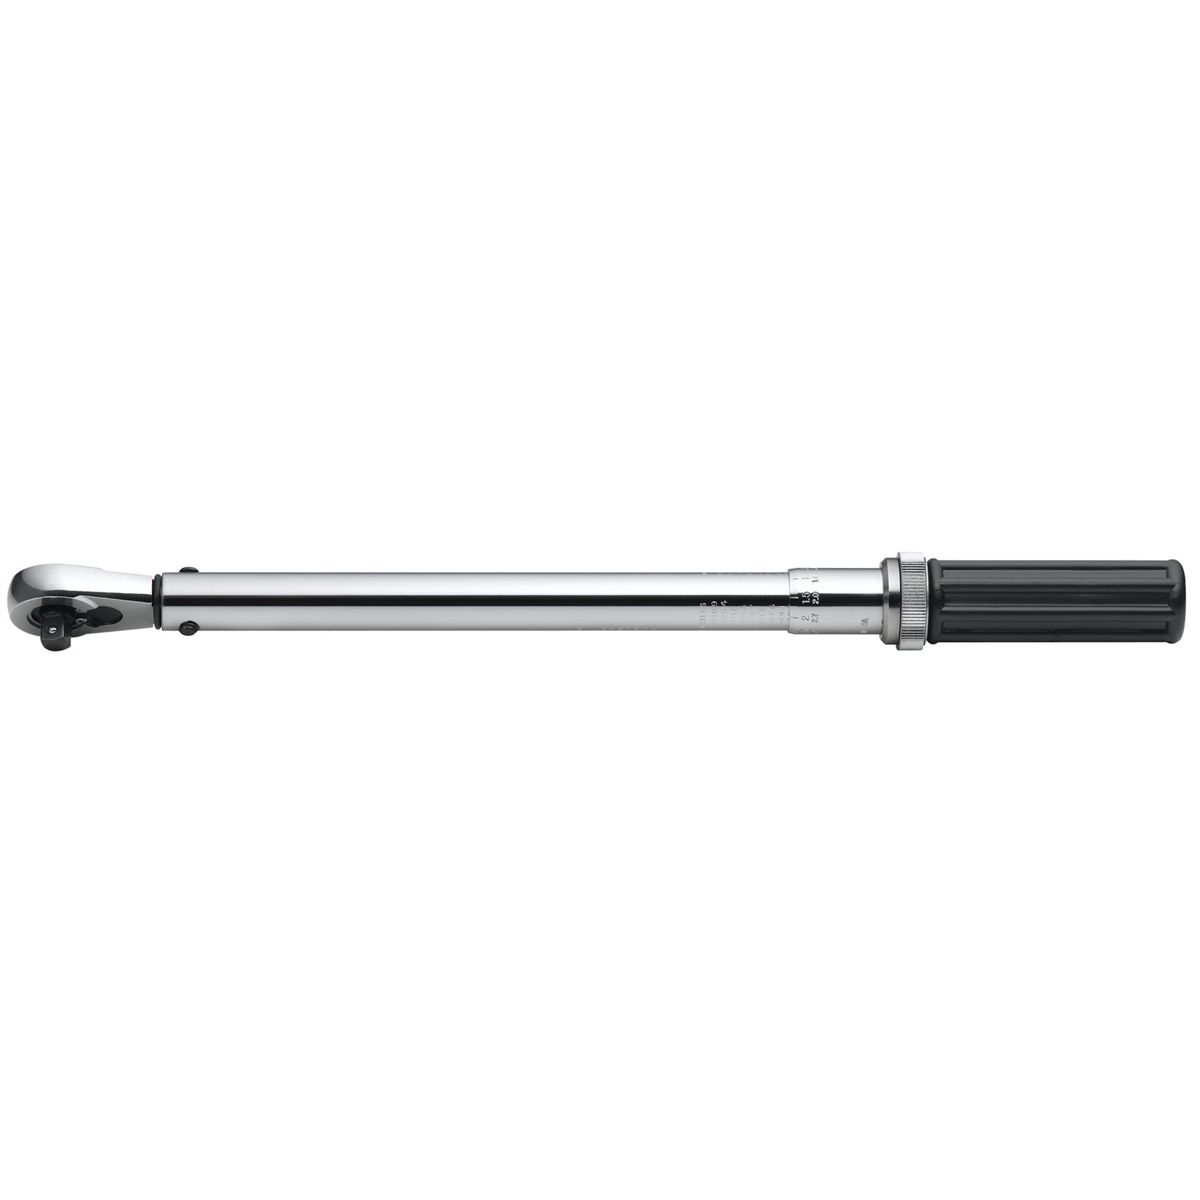 GearWrench 3/8 In Micrometer Torque Wrench - 10-100 ft-lbsKDT850